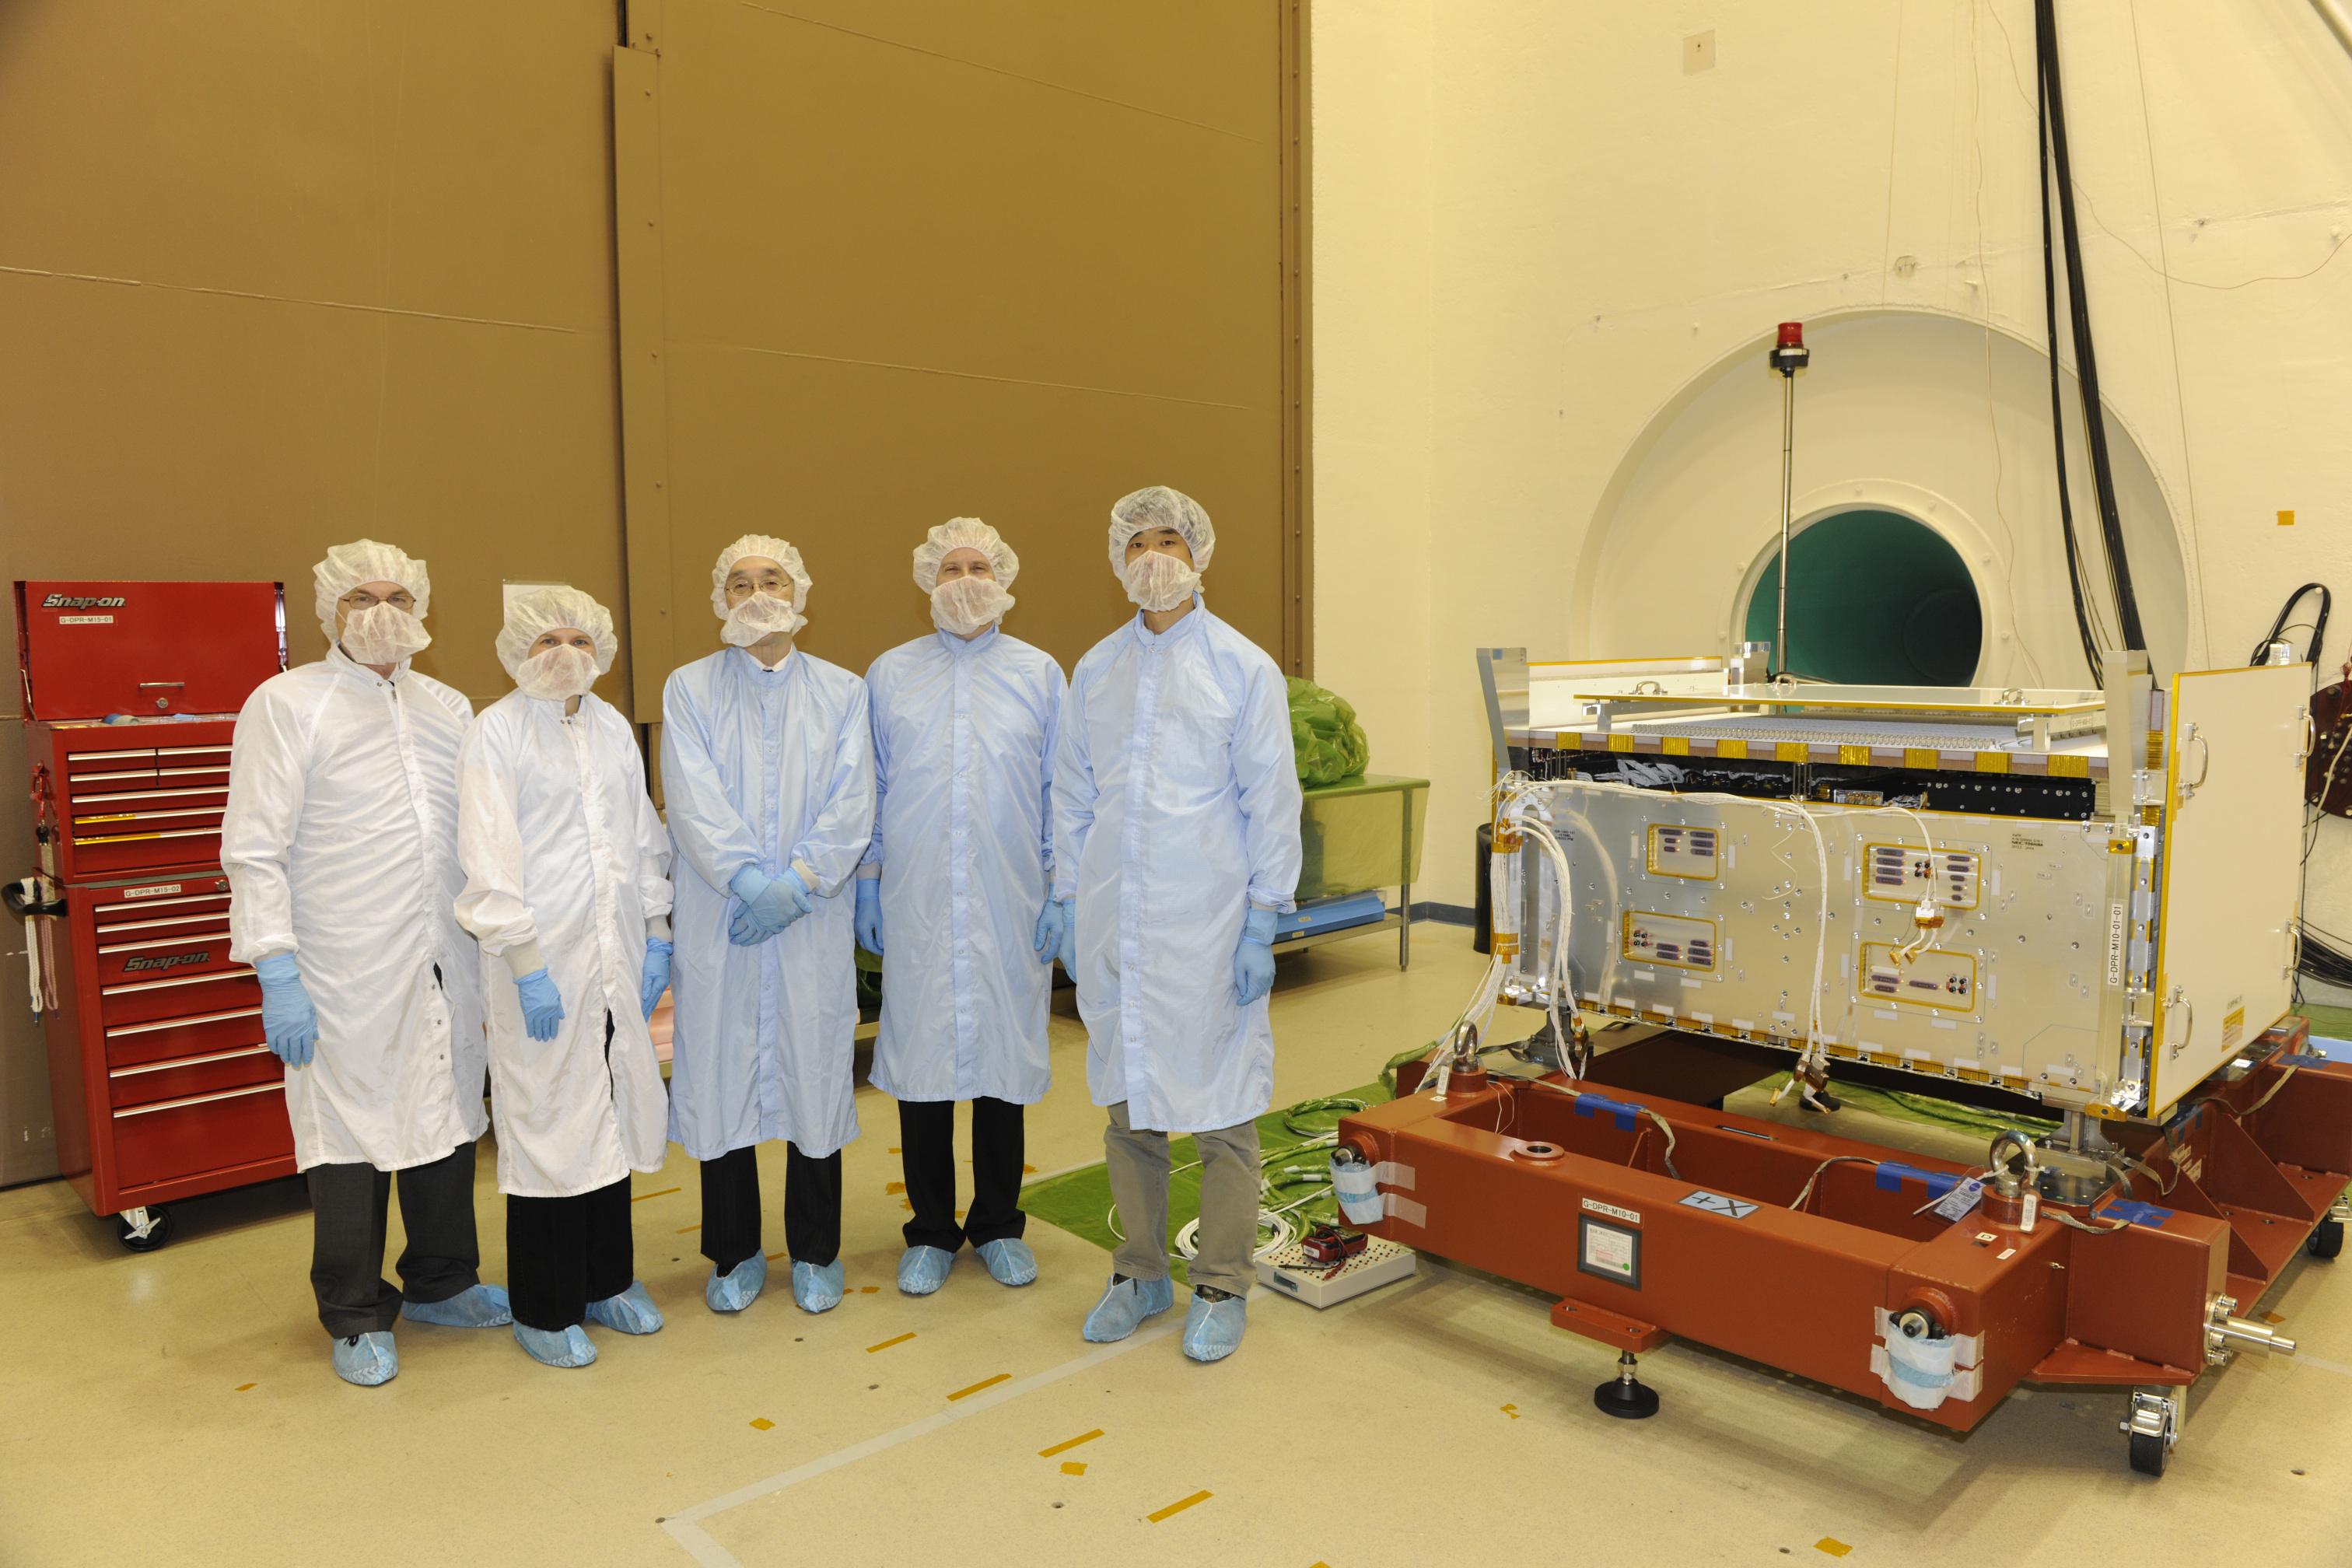 NASA and JAXA scientists in front of the DPR